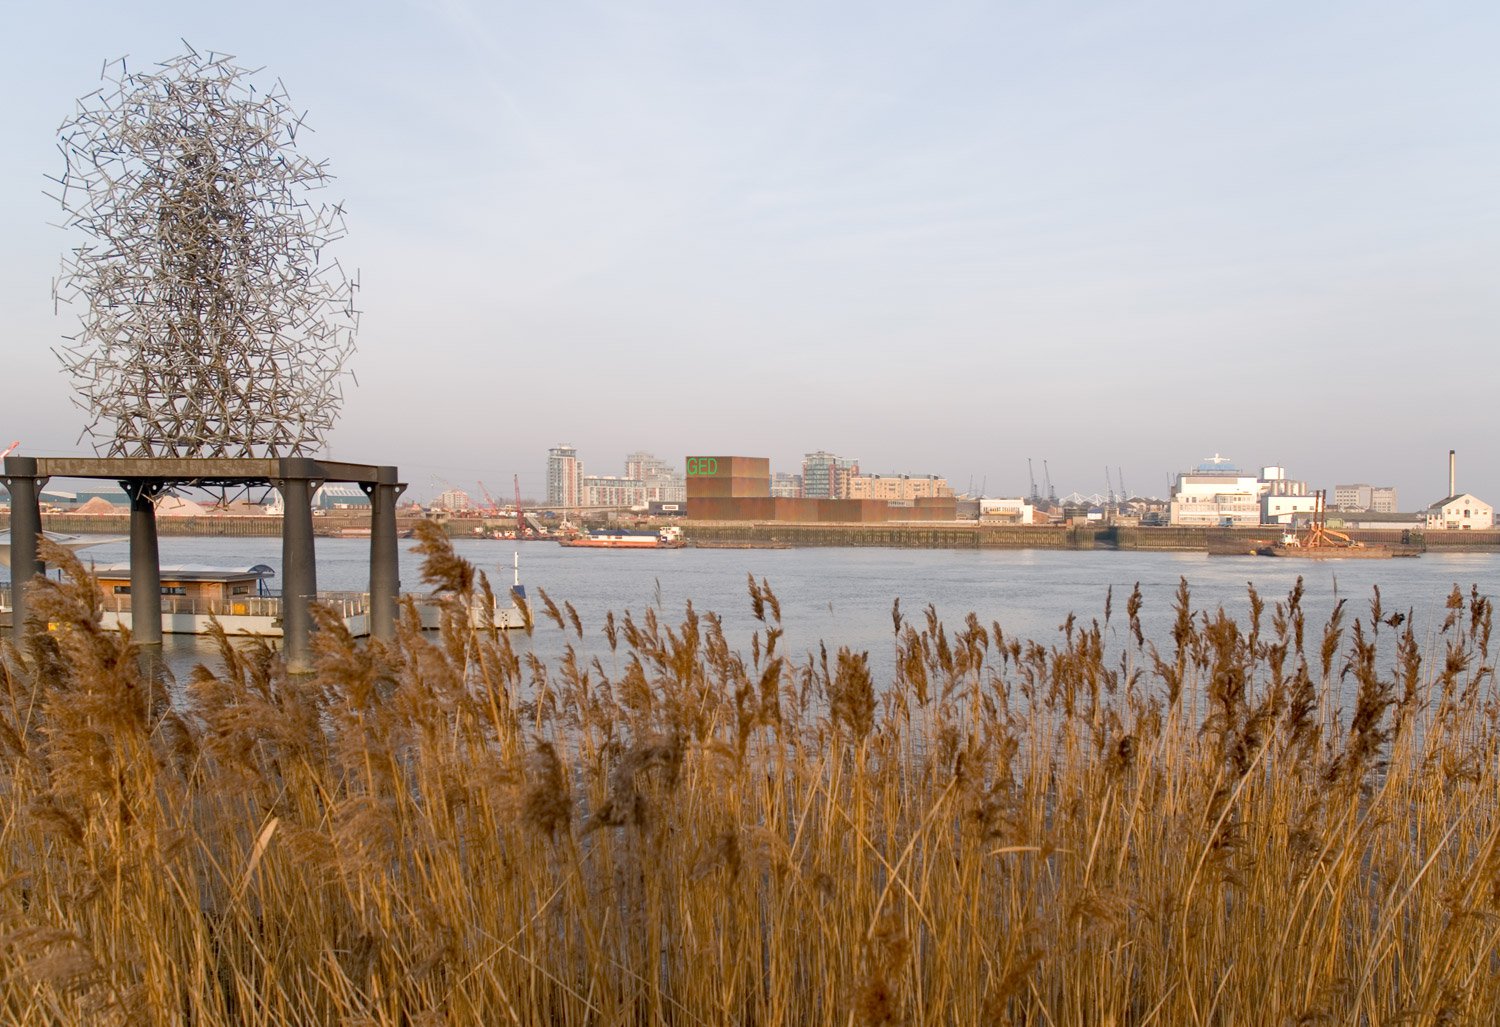 <p>In 2009 the London Development Agency (LDA) decided to commence work on the fringes of the east London urban area on the banques of the river Thames, in the East, and the river Lea, in the West, to assess how best to bring areas of dereliction back into productive use.</p>
                                    <p>At the same time, the Mayor of London had asked to create zones specifically for green businesses – one that both practised sustainable business process and created green products, material or provided green services.</p>
                                    <p>We were a member of a multi-disciplinary team to prepare a business City Brand for part of East London that had been designated as a growth zone for green enterprises – ones making or using sustainable technologies and processes.</p>
                                    <p>We were responsible for the vision for the future development of the area as a destination for green enterprises and for the specification of its offer.</p>
                                    <p>Subsequently this policy was ratified and work begun to regenerate the area.</p>
                                    <p>* Project led by Placematters before uniting with Bloom Consulting</p>